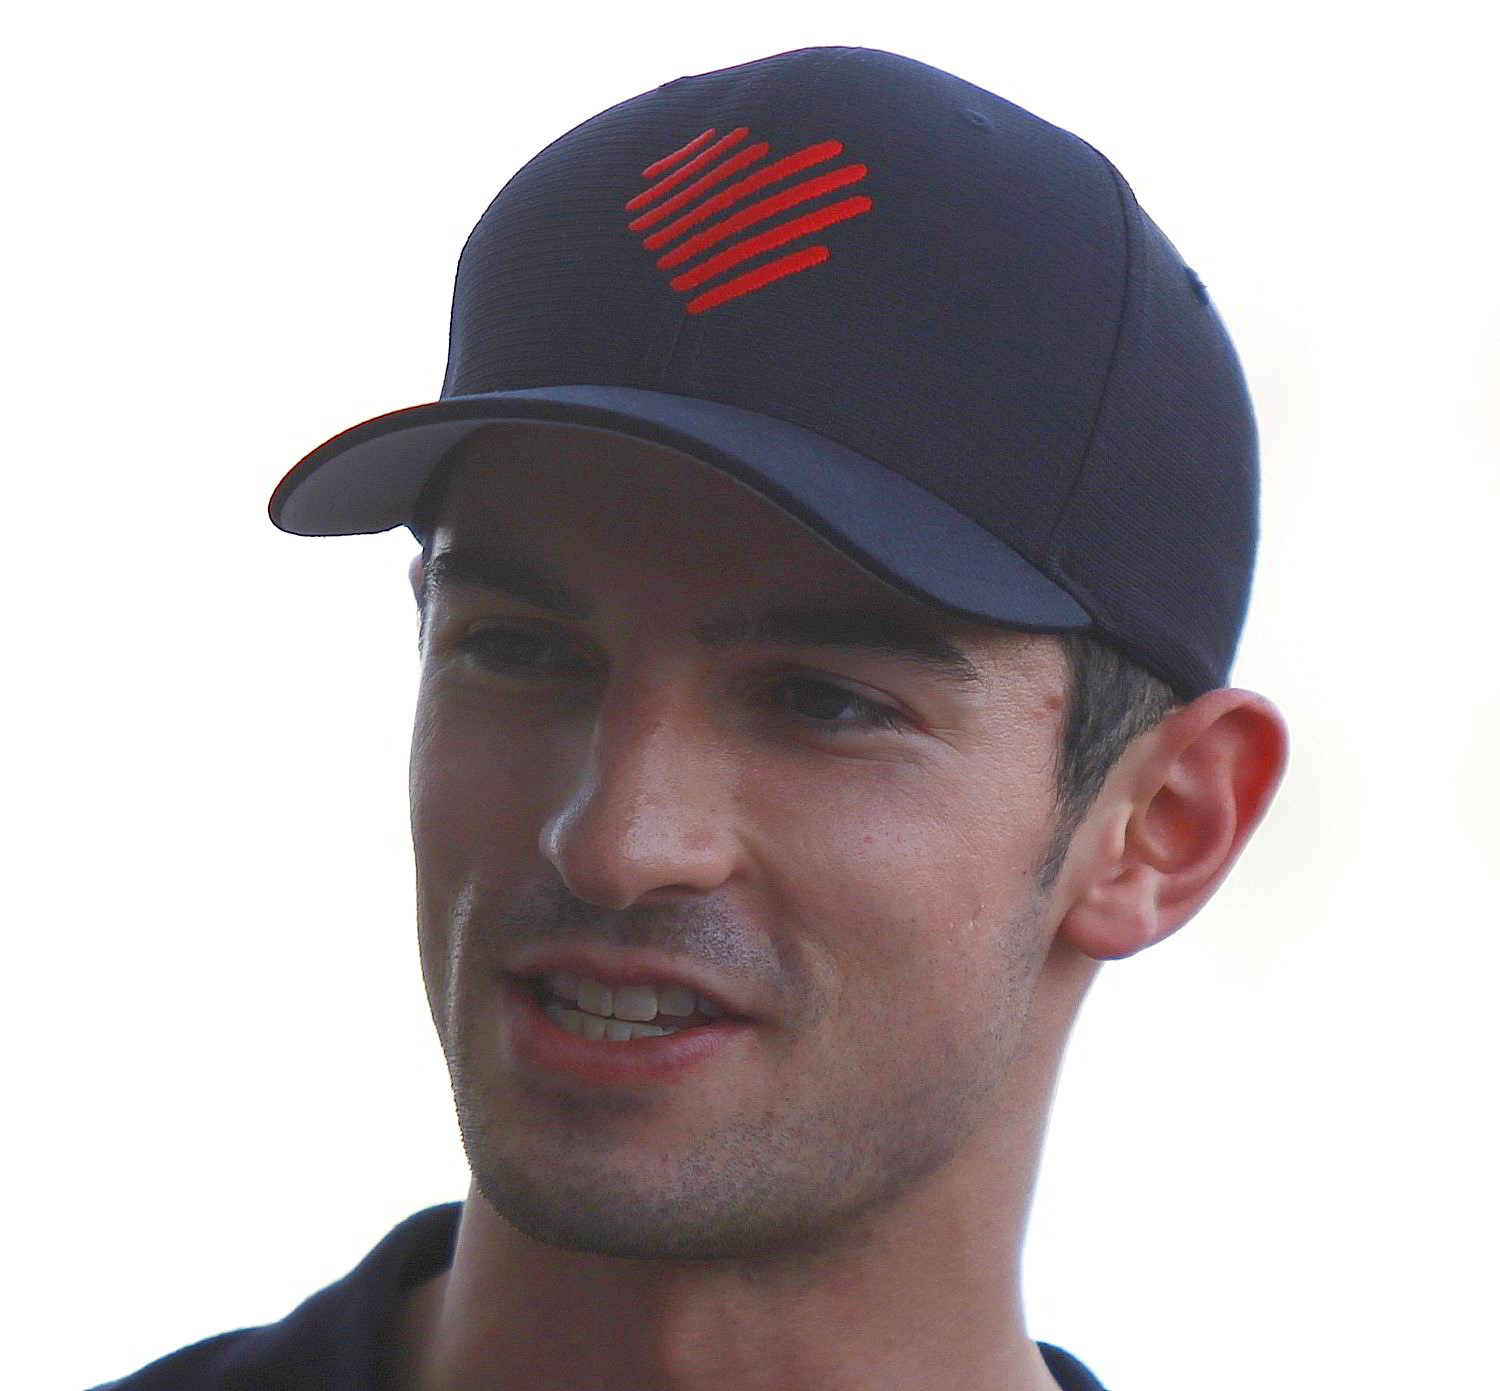 It appears Alexander Rossi's check is not big enough and he will pulling weeds in his garden in 2016